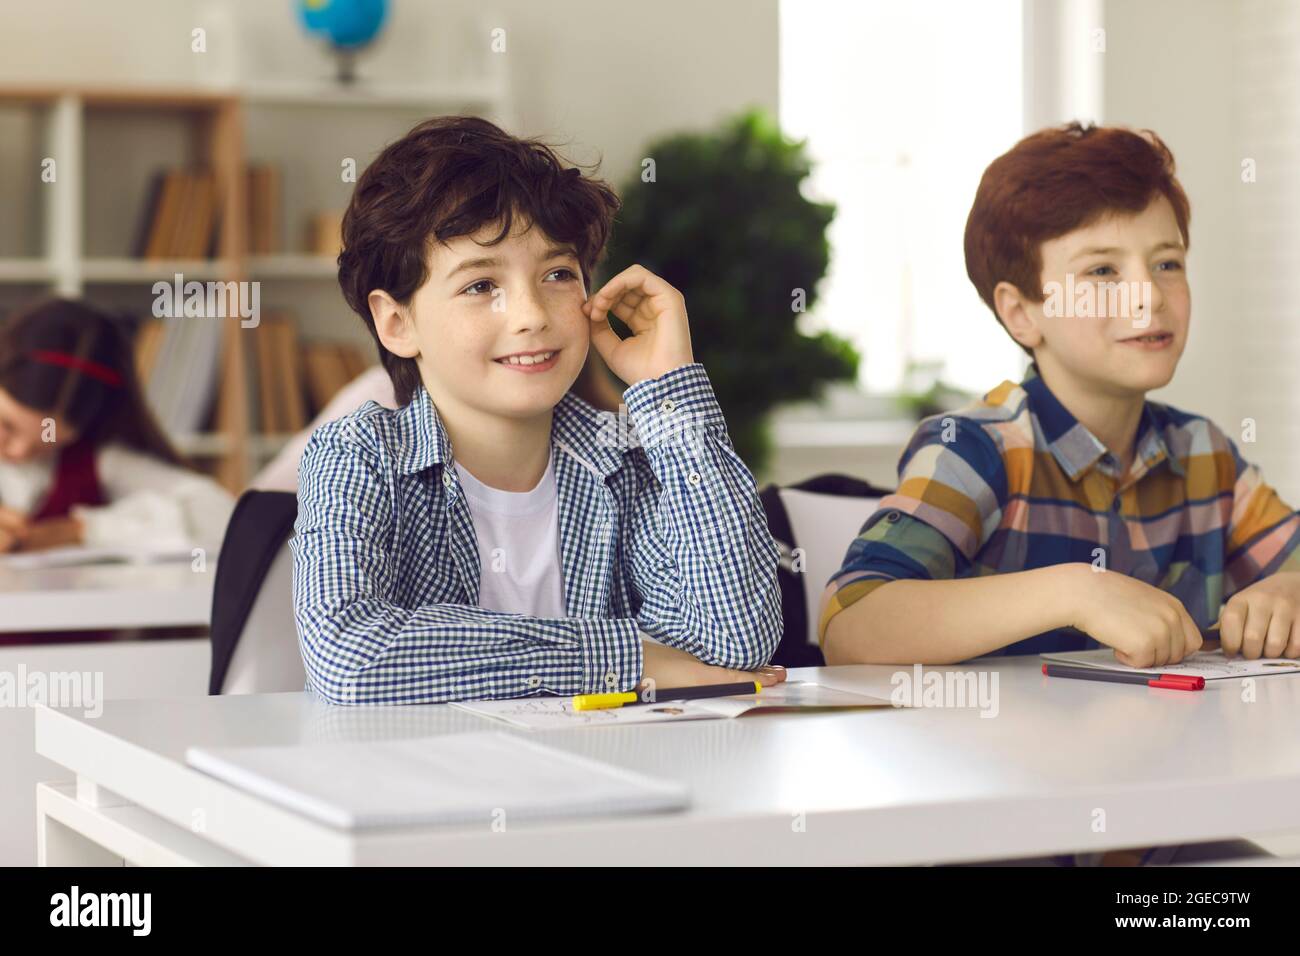 Cute smiling elementary school boy sitting at a desk together with his classmate Stock Photo